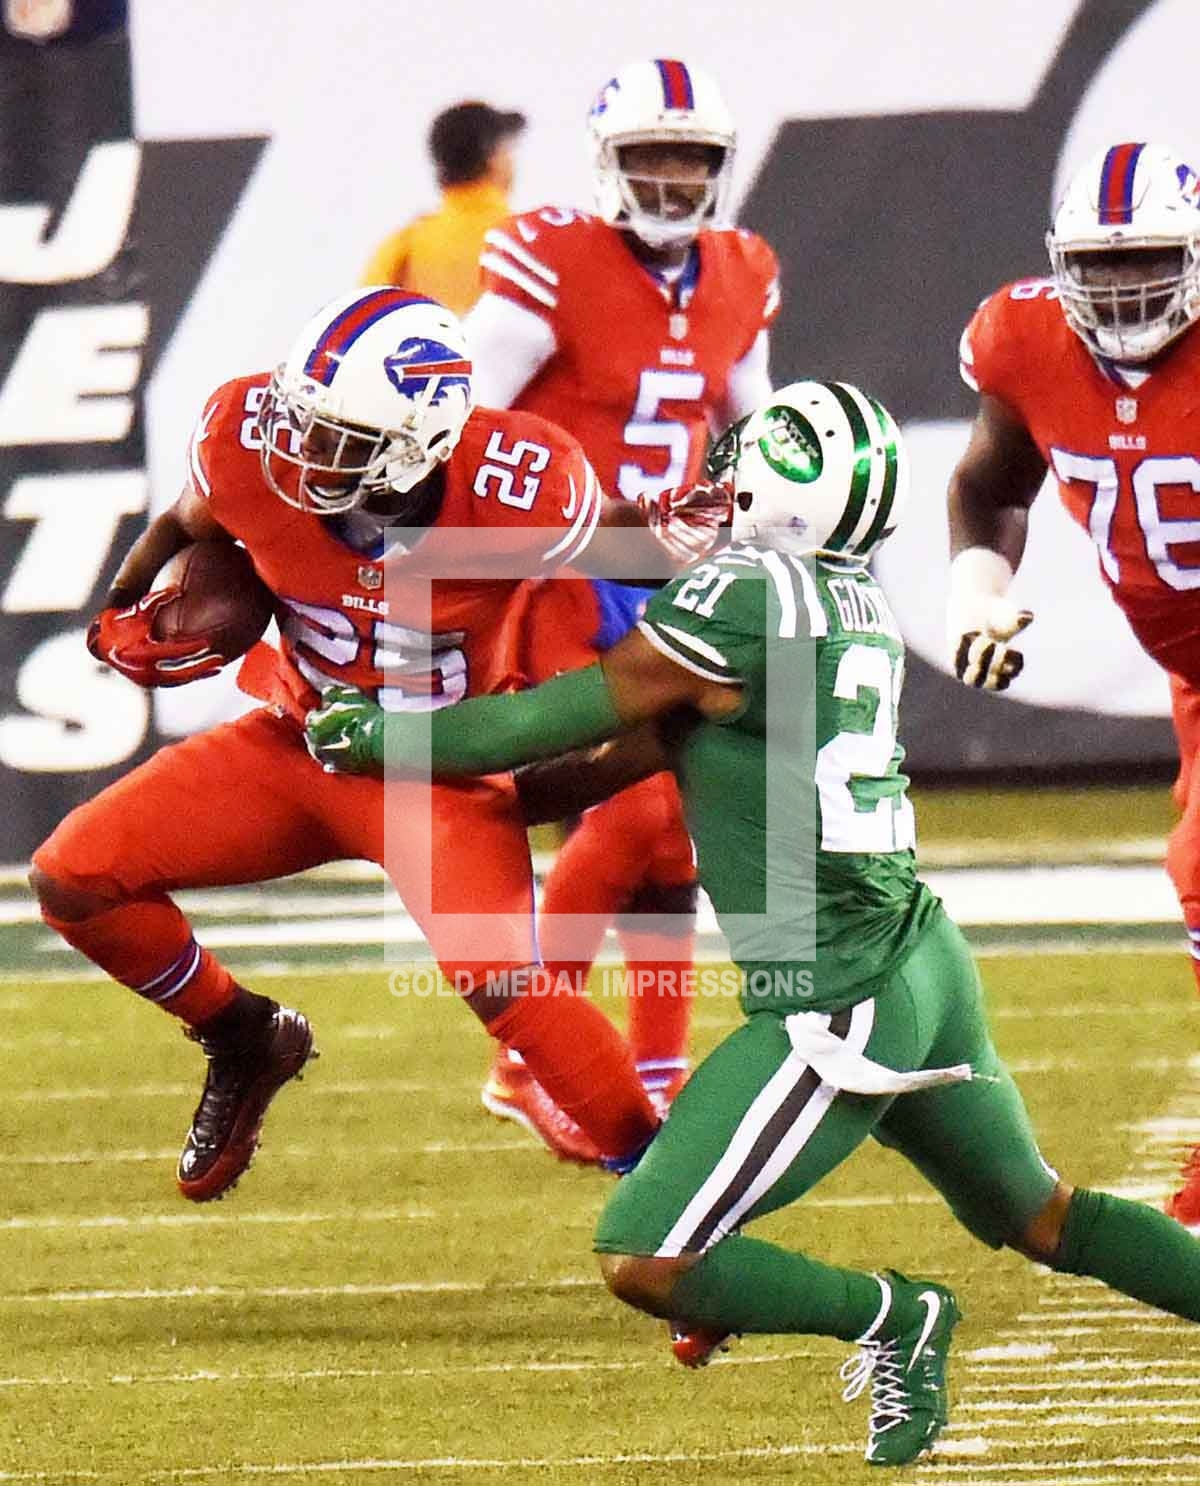 Buffalo Bills running back LE SEAN MCCOY runs through the arms of New York Jets free safety MARCUS GILCHRIST for a first down in the first quarter at MetLife Stadium. LE SEAN MCCOY ran for 112yards leading the Bills to a 22-17 victory over the New York Jets.